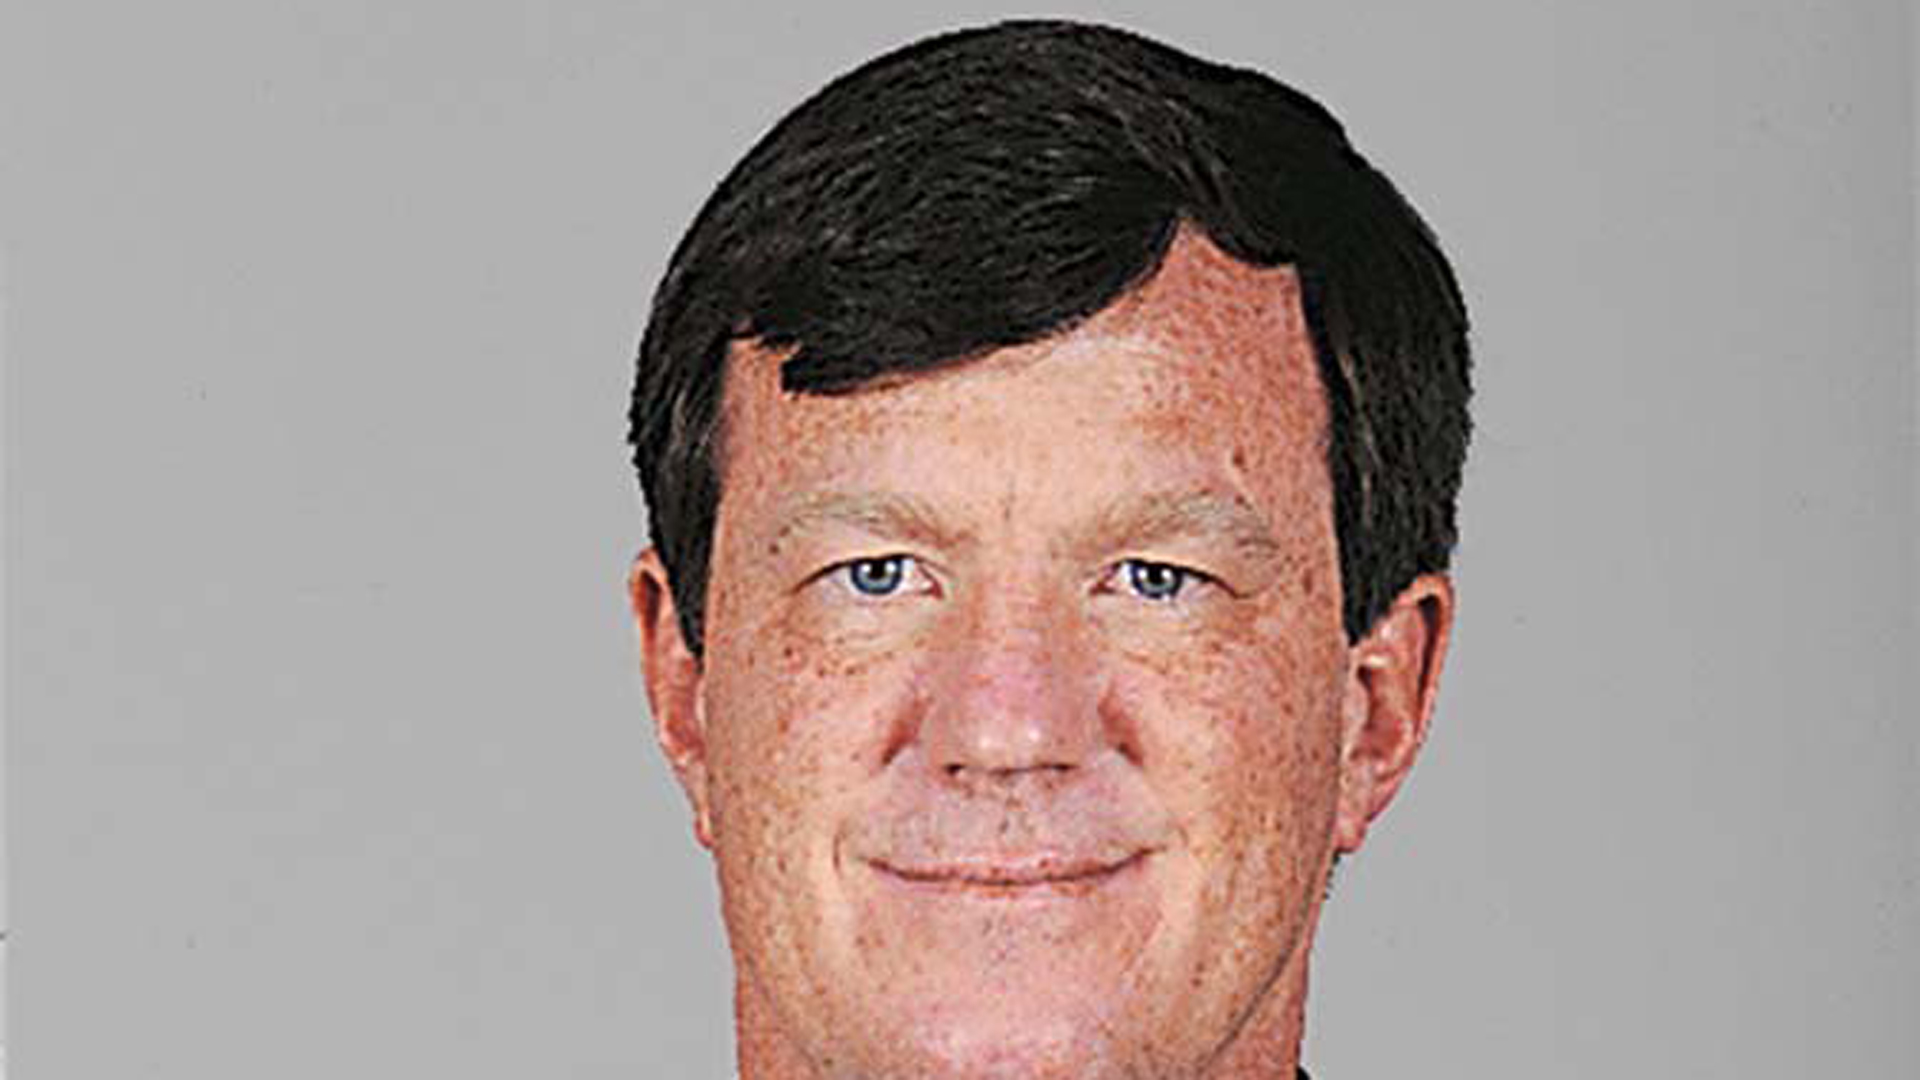 Panthers interim GM Marty Hurney put on leave after allegations of harassment